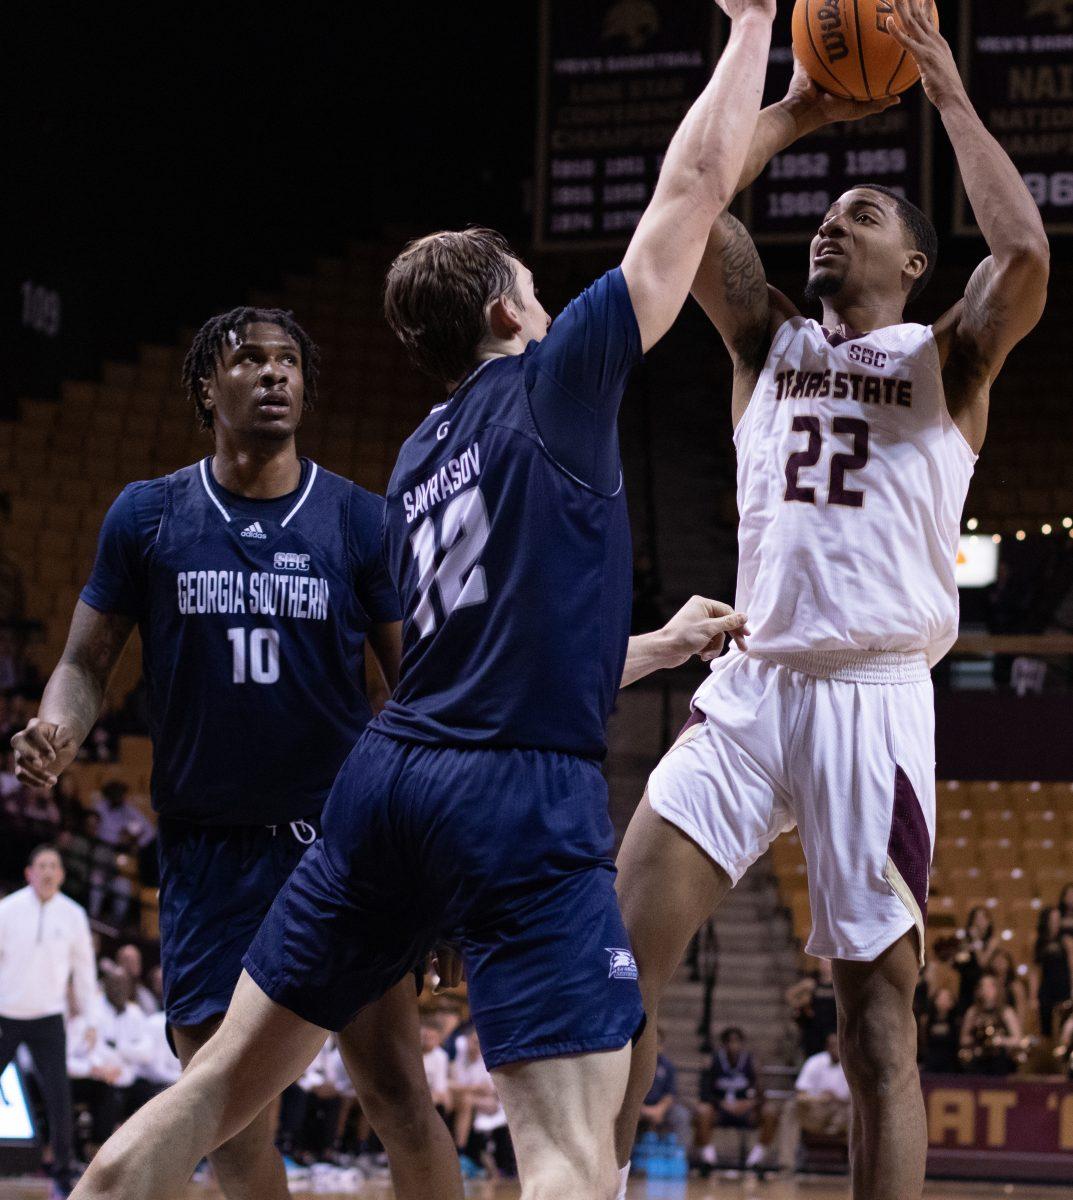 Texas State senior forward Nighael Ceaser (22) shoots against Georgia Southern University, Thursday, Jan. 26, 2023, at the Strahan Arena. The Bobcats won 70-67.